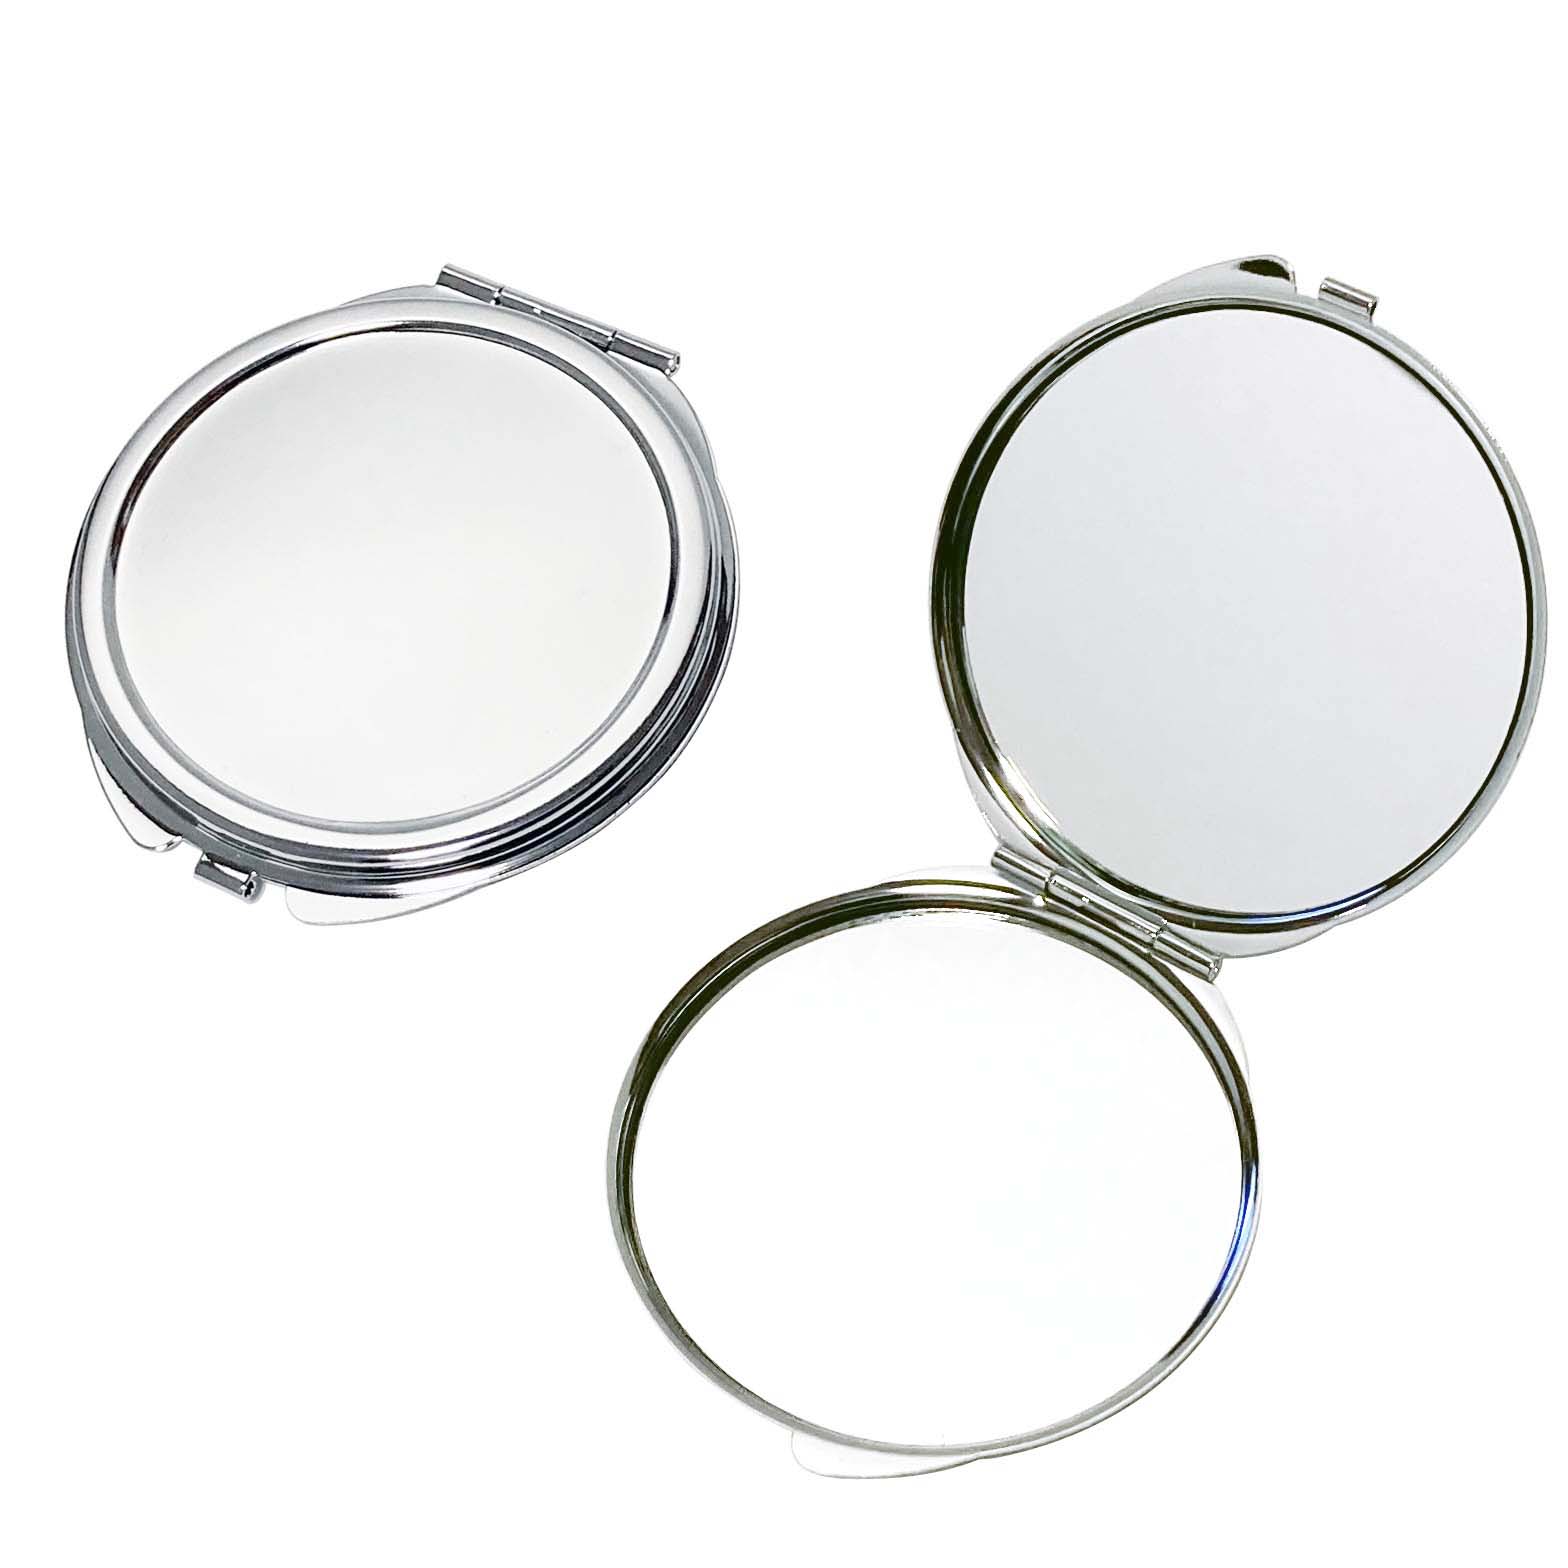 Compact mirror (with drop) Round / square